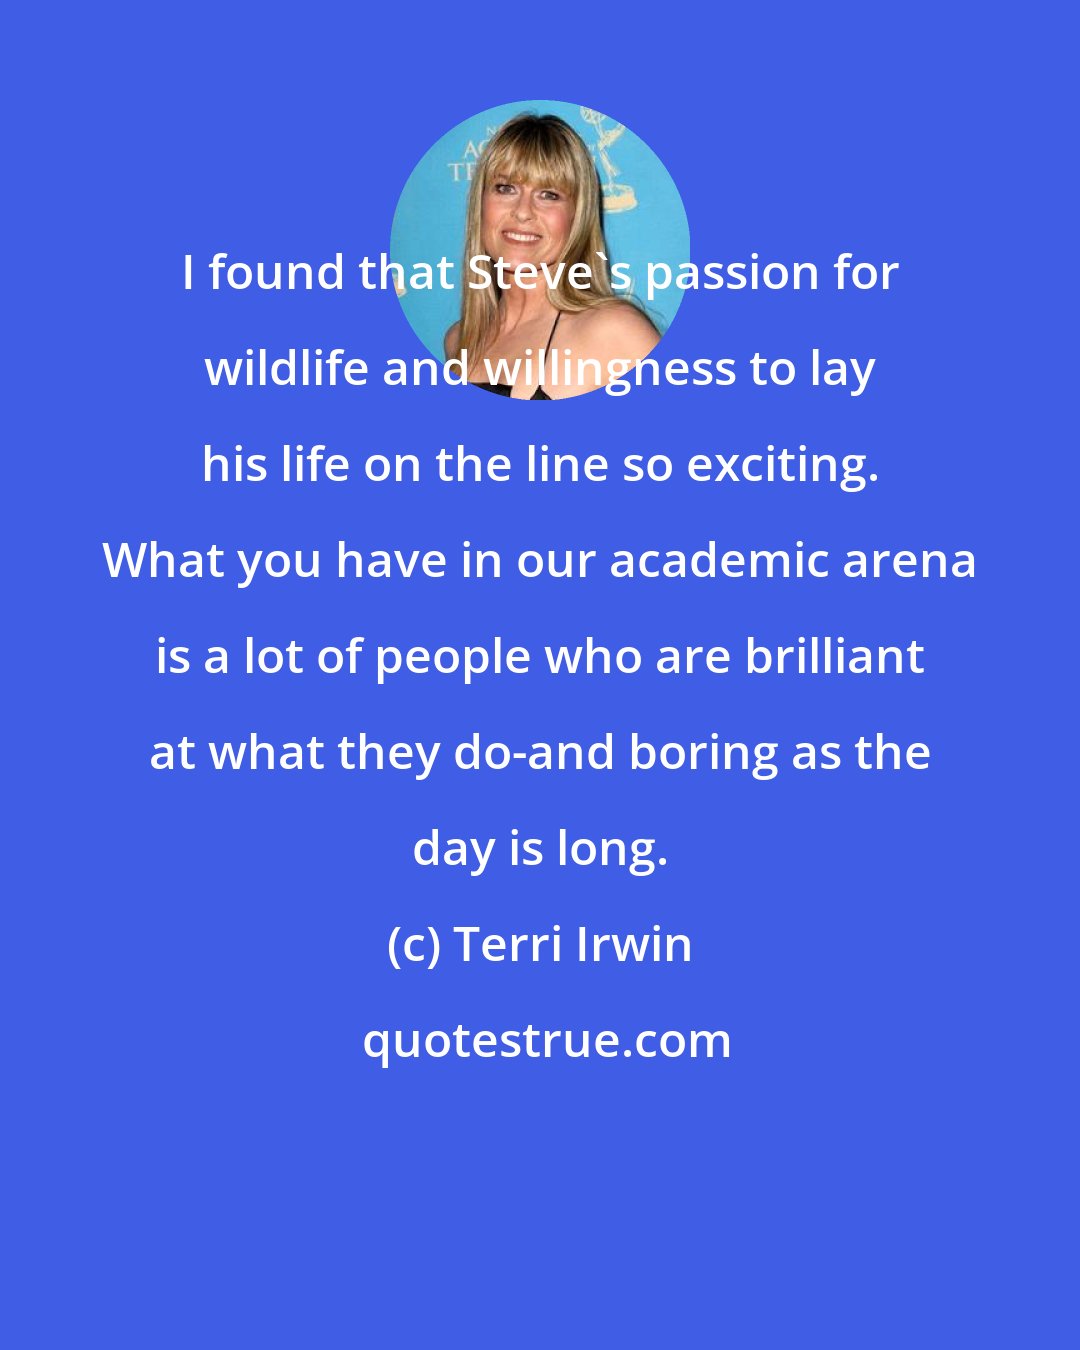 Terri Irwin: I found that Steve's passion for wildlife and willingness to lay his life on the line so exciting. What you have in our academic arena is a lot of people who are brilliant at what they do-and boring as the day is long.